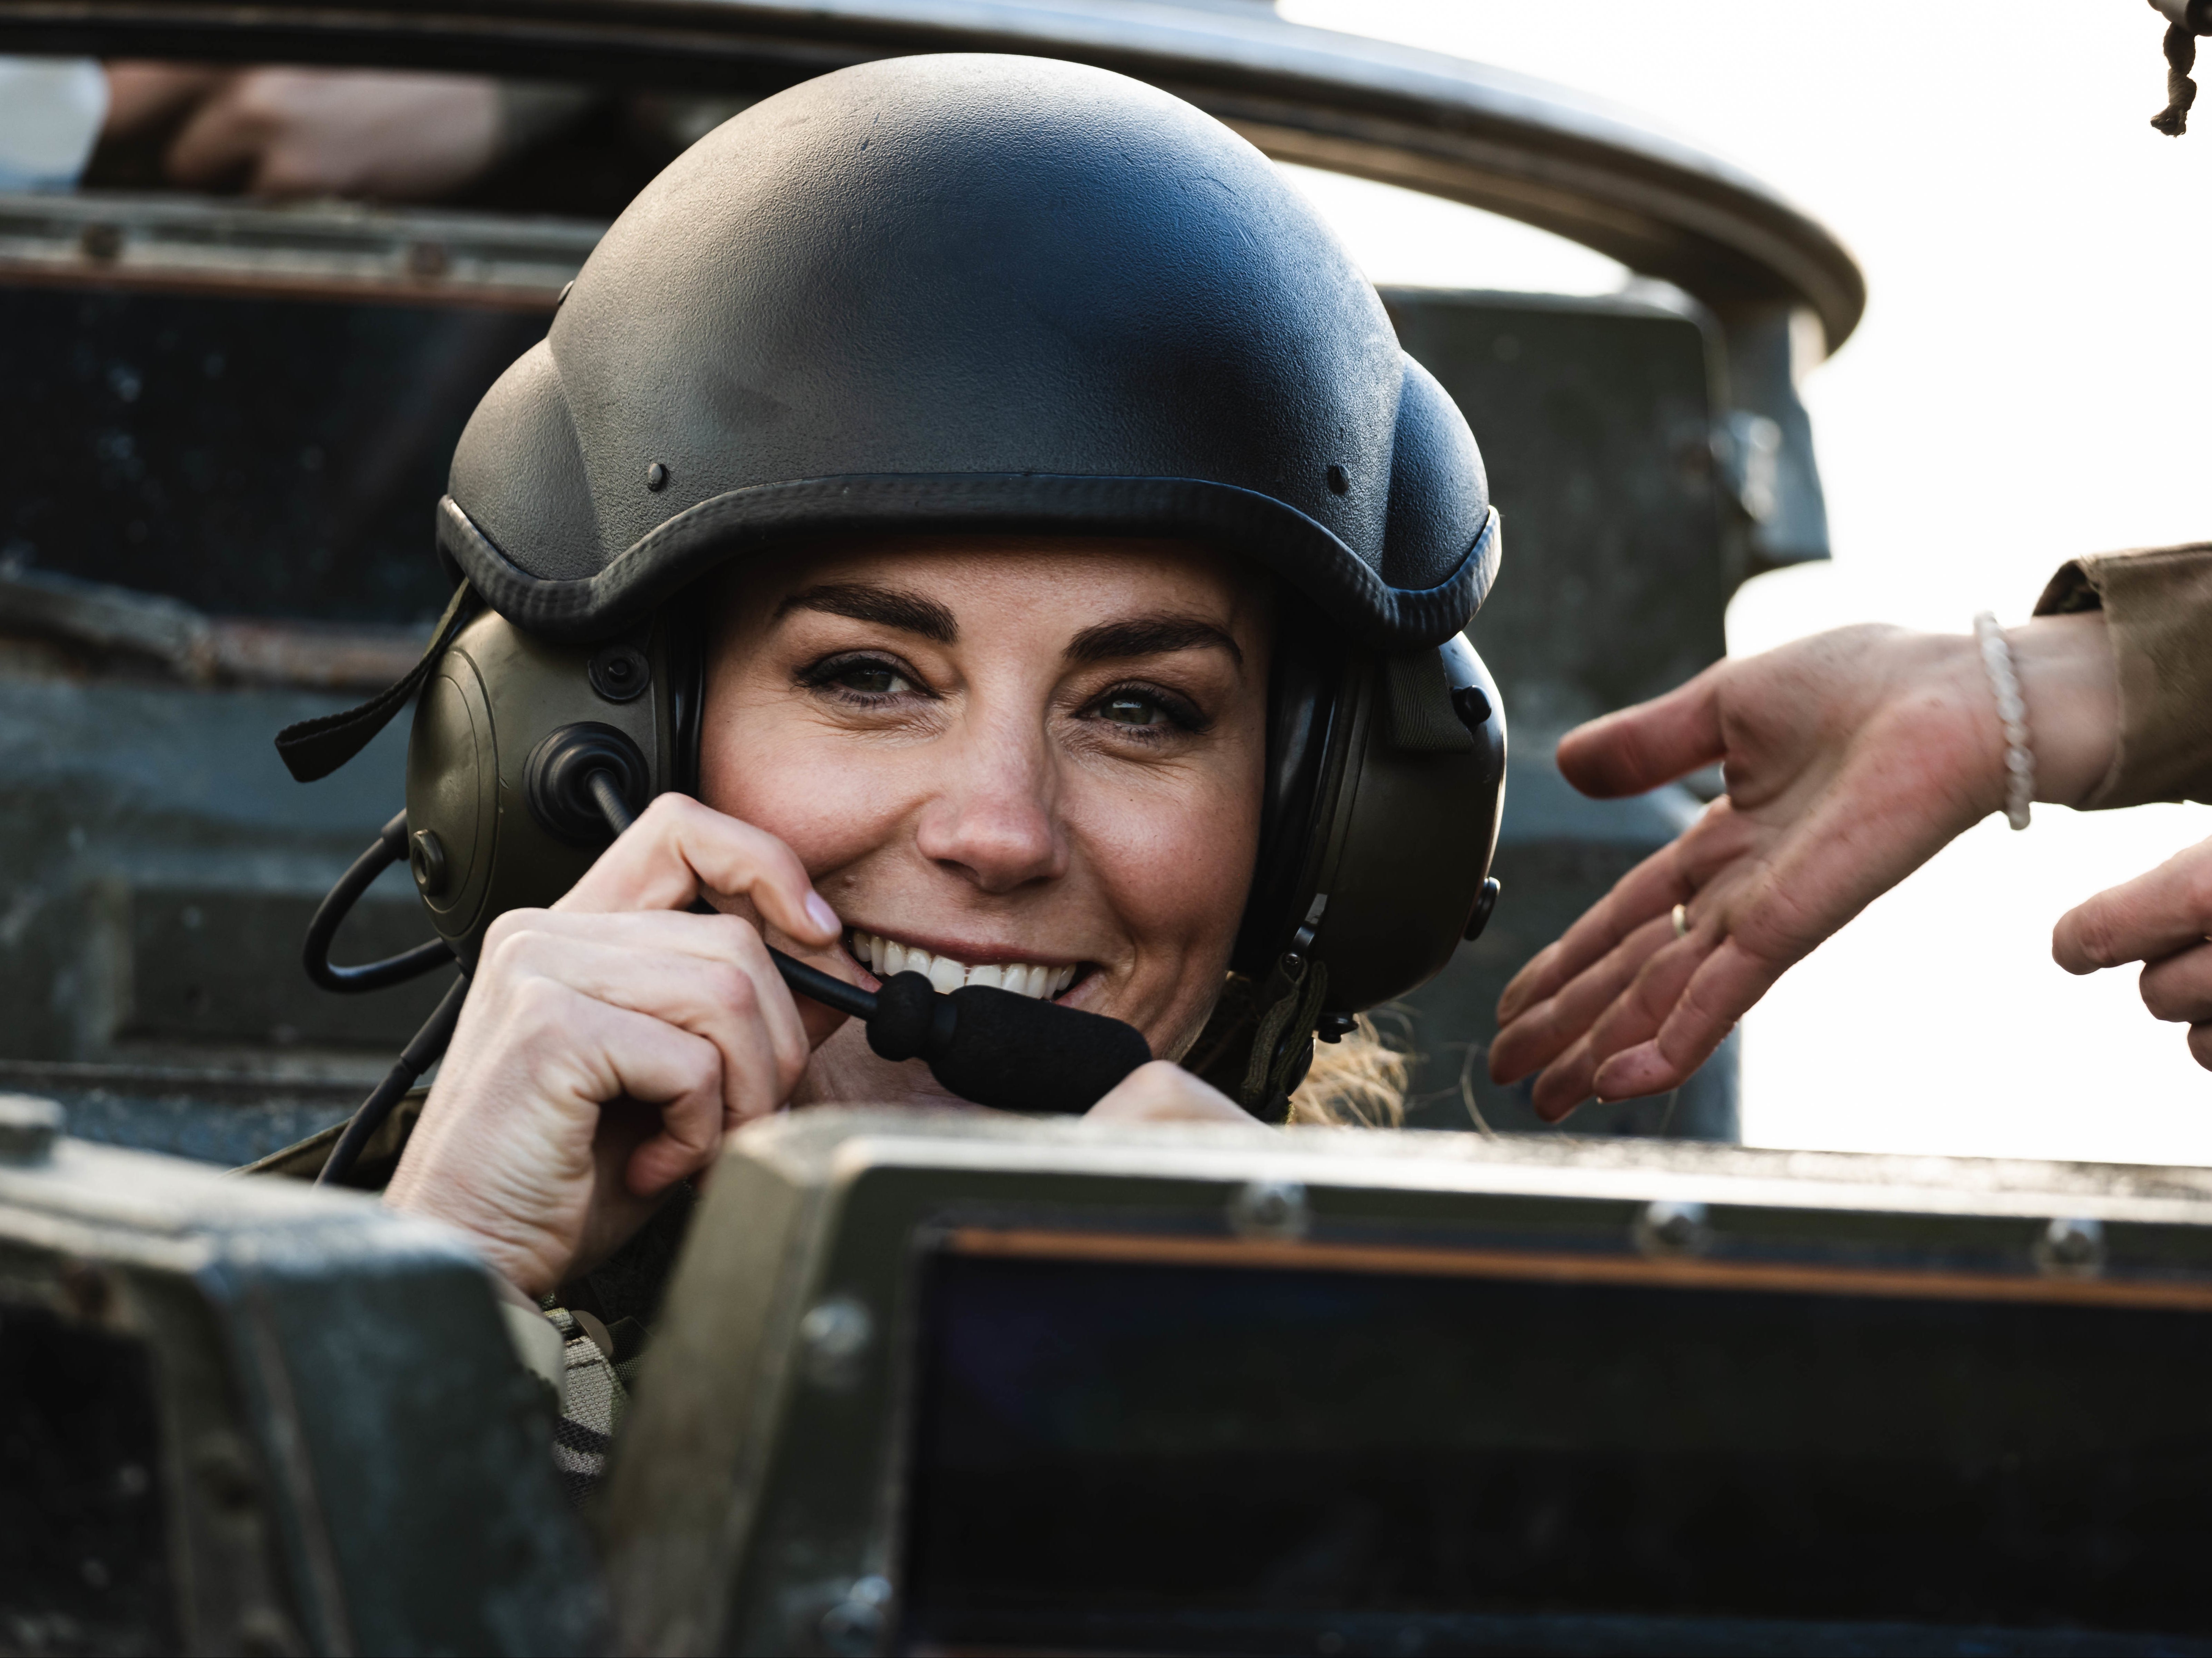 Duchess of Cambridge releases new images to mark Armed Forces Day